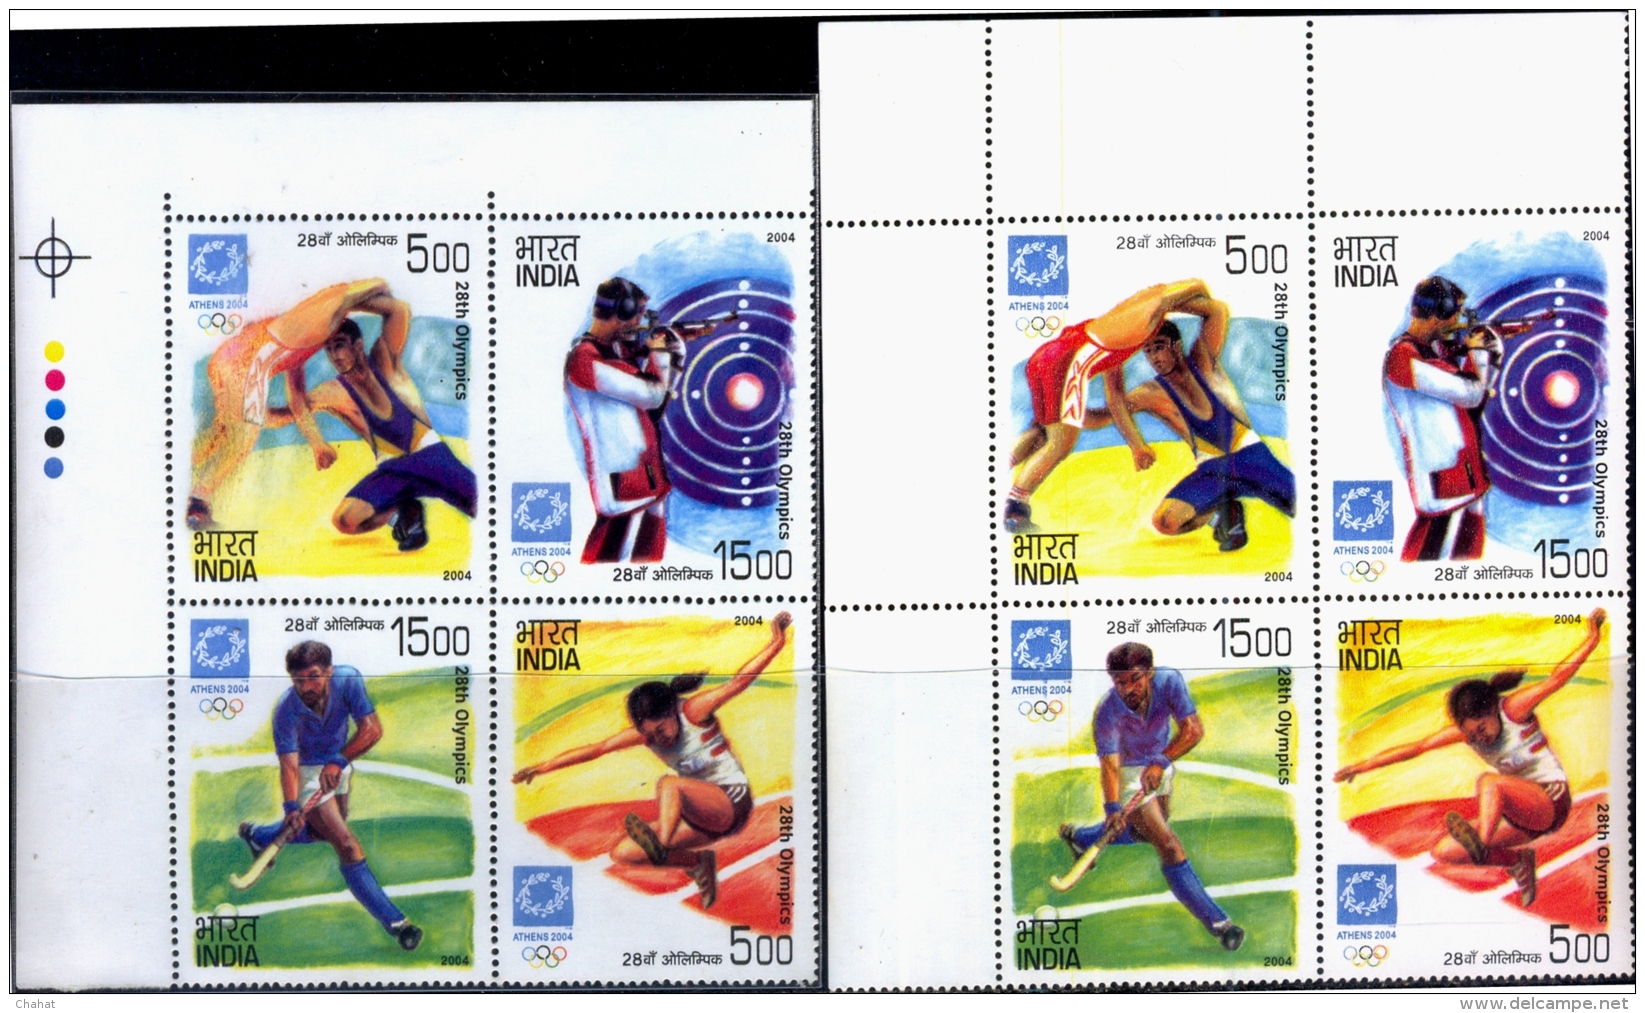 ATHENS OLYMPICS-MASSIVE ERROR-SETENANT BLOCK WITH A NORMAL BLOCK-INDIA-2010-MNH-MSE-147 - Errors, Freaks & Oddities (EFO)